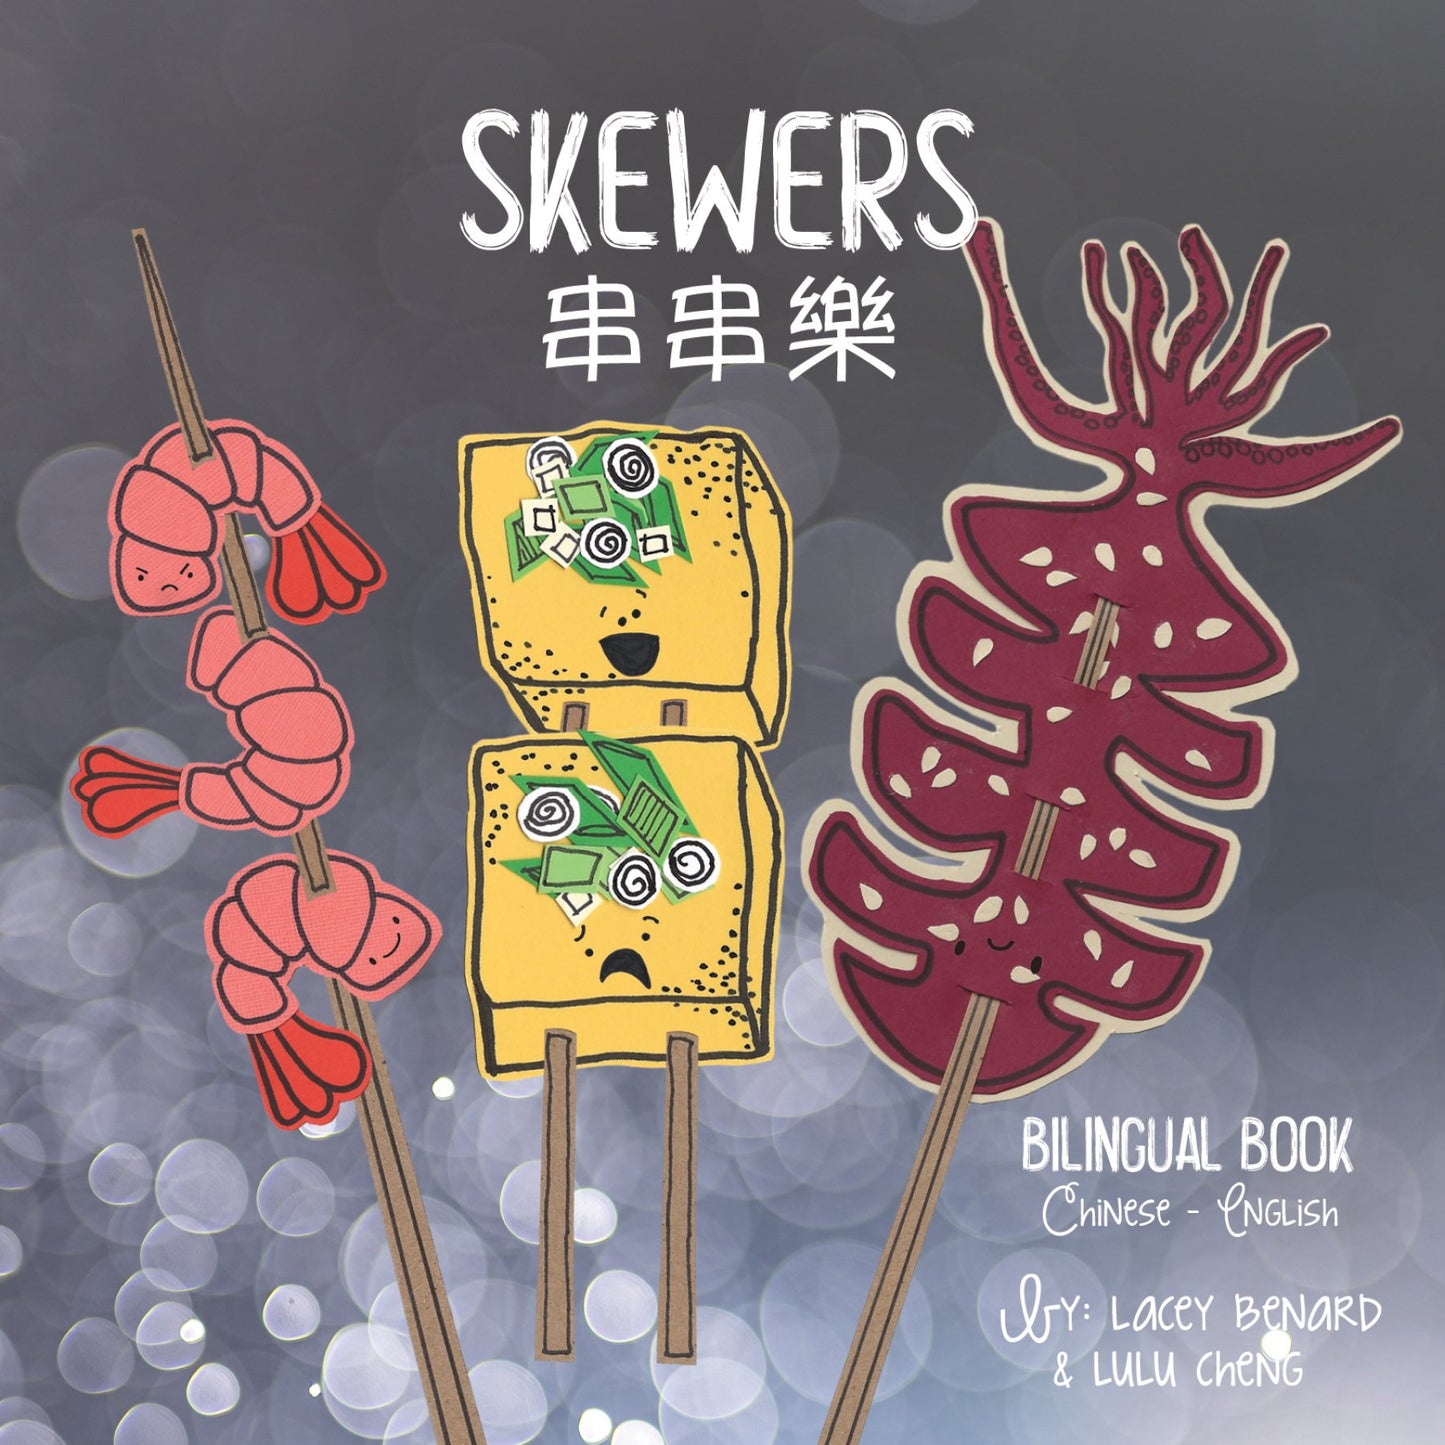 Skewers 串串樂, is a bilingual board book in Bitty Bao's Taiwan series, by Lacey Benard and Lulu Cheng, written in English, traditional Chinese, with pinyin and zhuyin.  A book about counting through different types of skewers.